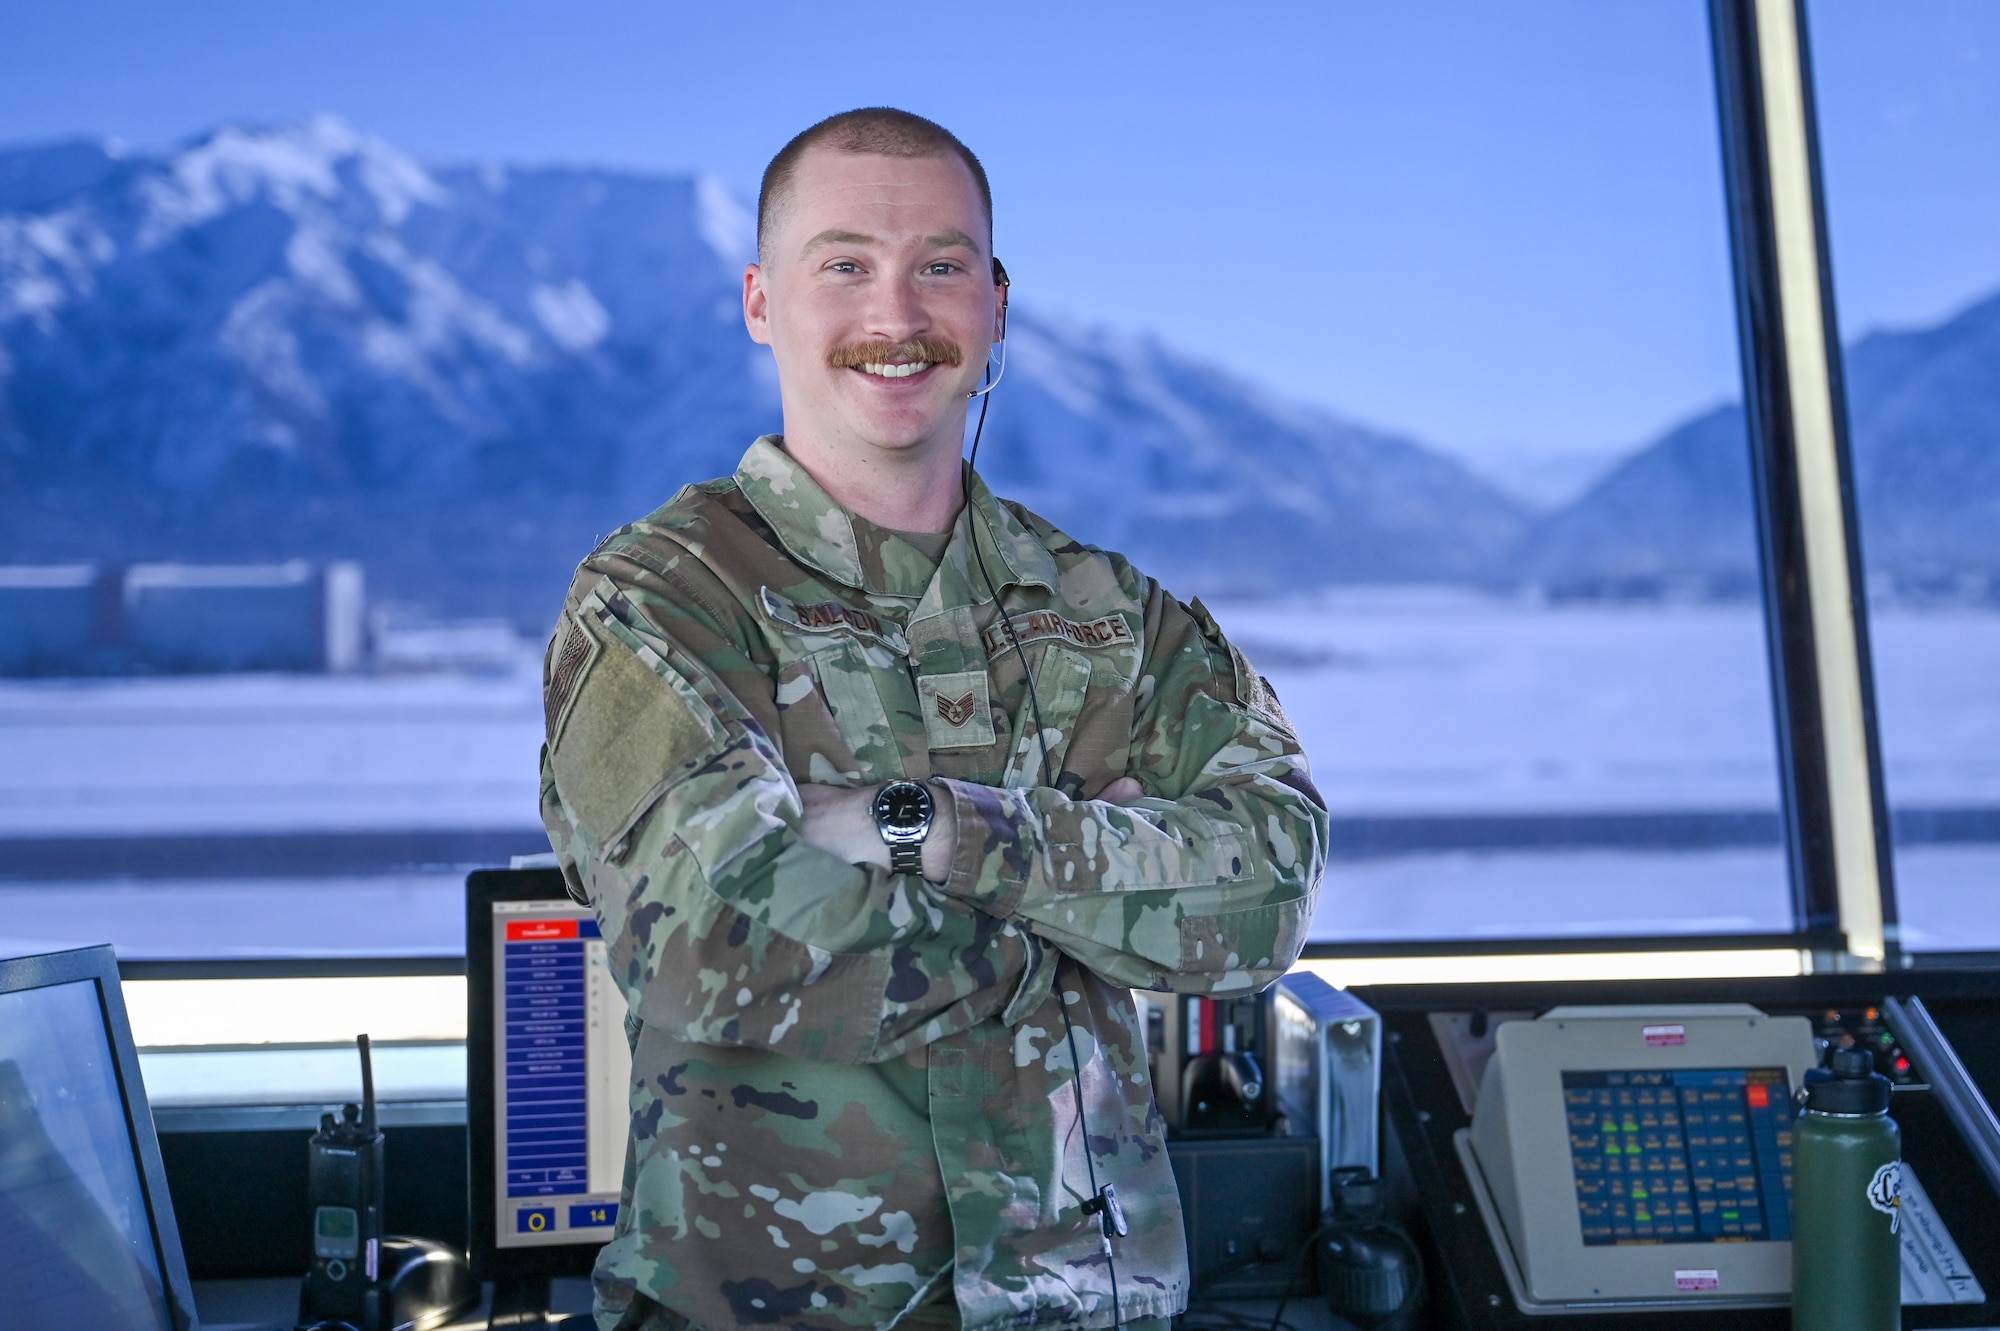 Staff Sgt. Harold Balcom, 75th Operations Support Squadron, poses in the flight tower Feb. 16, 2023, at Hill Air Force Base, Utah